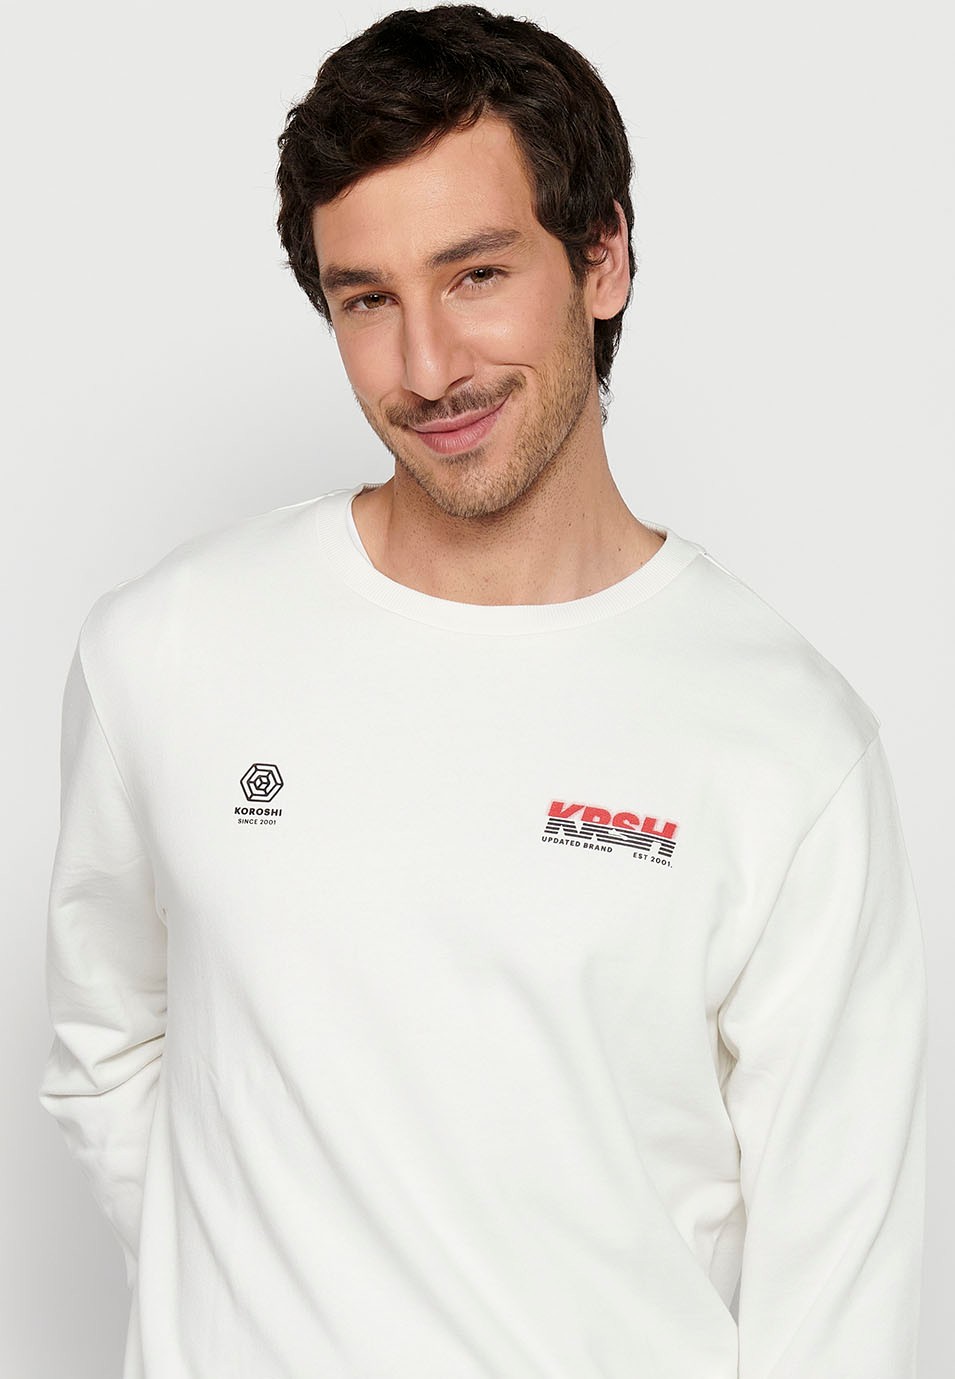 Long-sleeved sweatshirt with round neck and back detail in White for Men 7